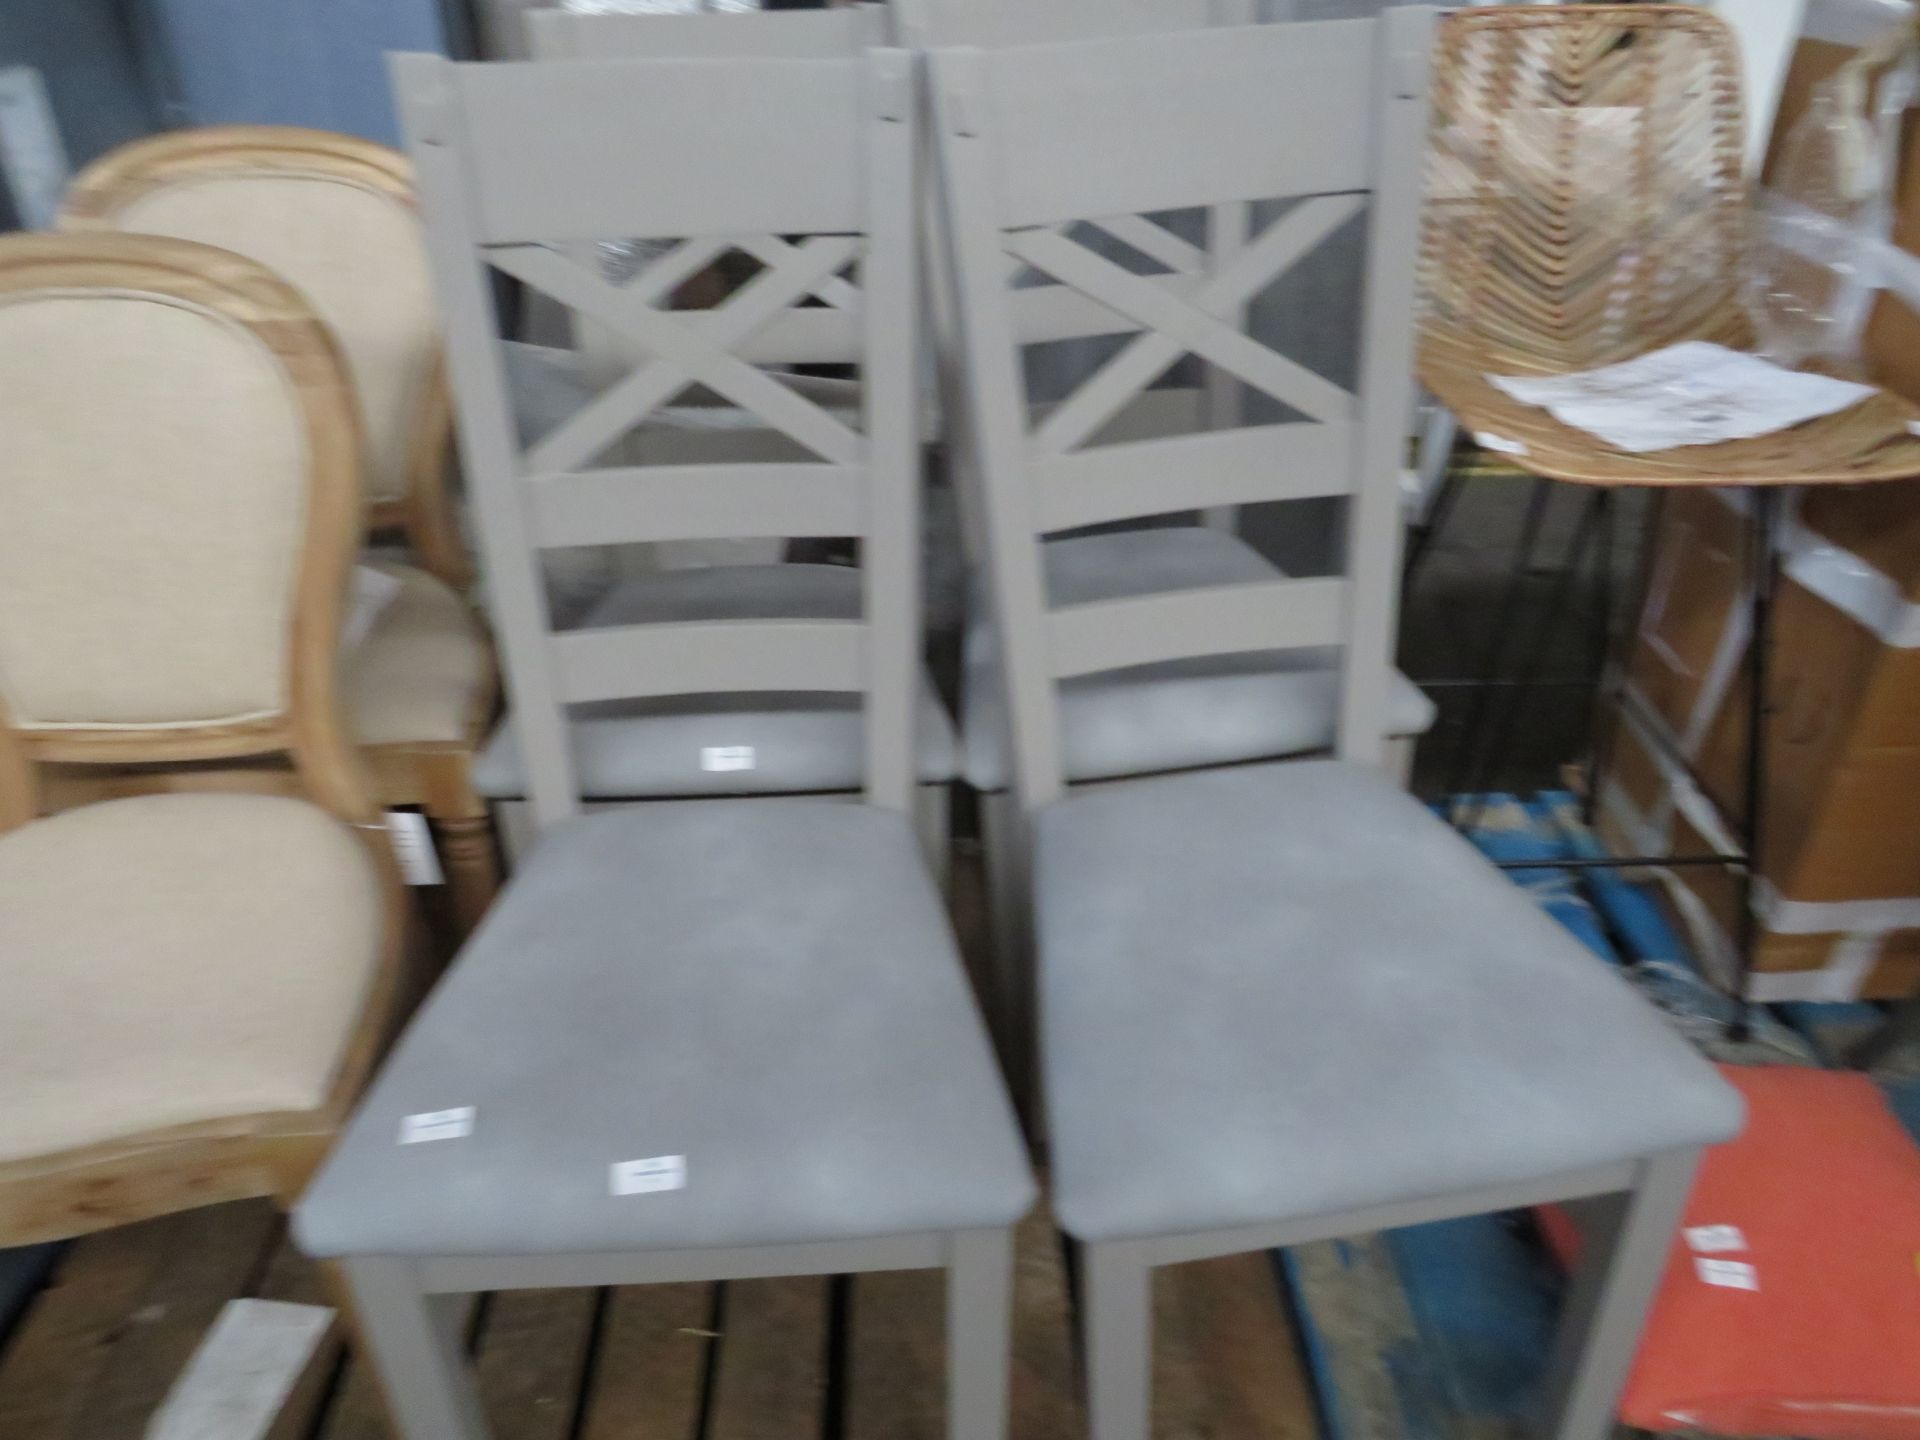 Oak Furnitureland St Ives Light Grey Painted Chair with Dappled Silver Fabric Seat (Pair) RRP 380.00